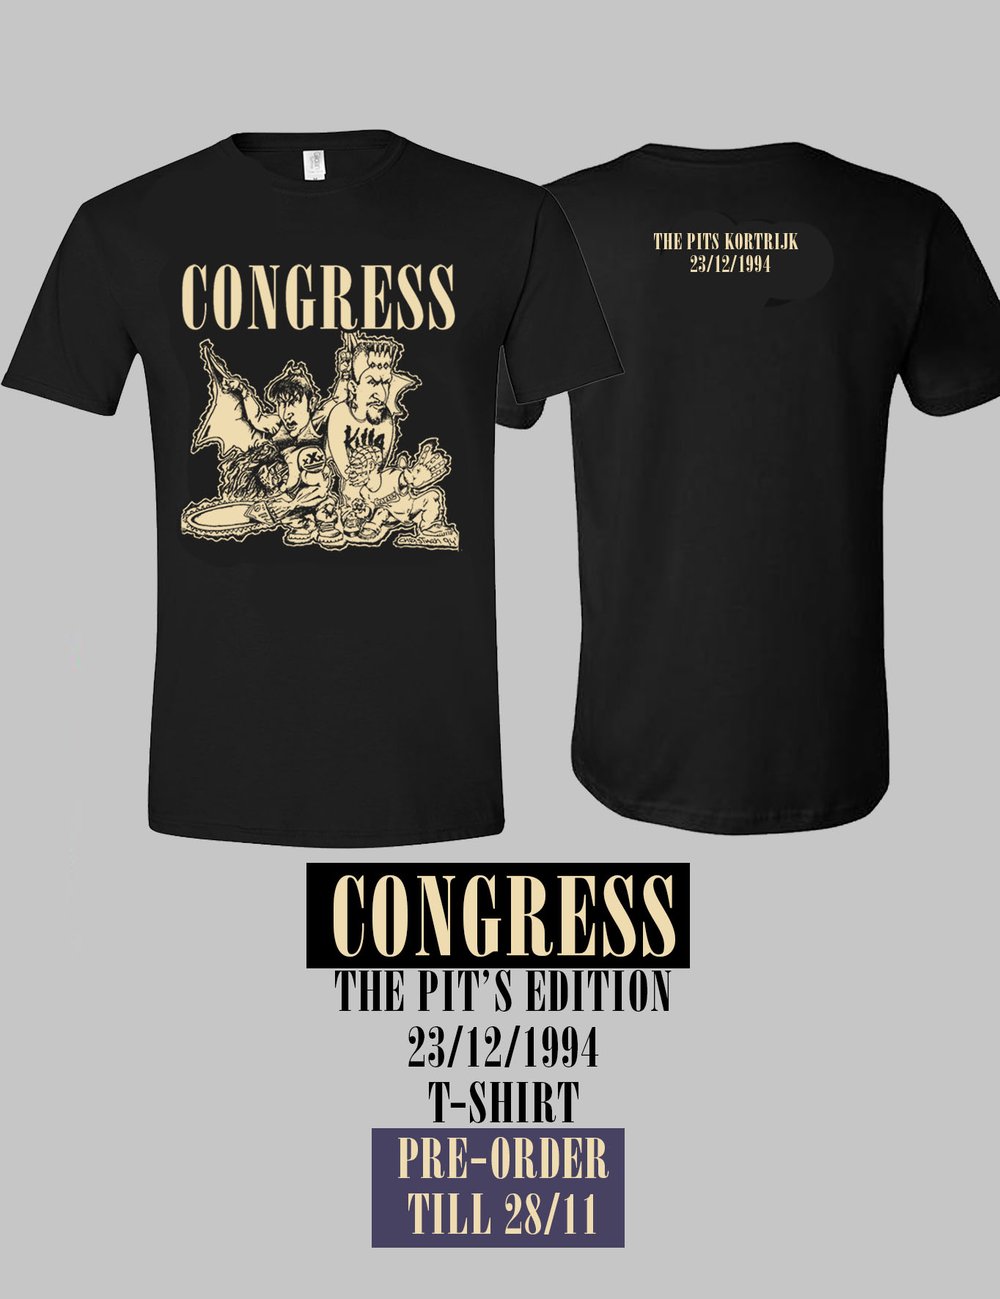 CONGRESS 'The pits edition 23/12/1994' T-shirt